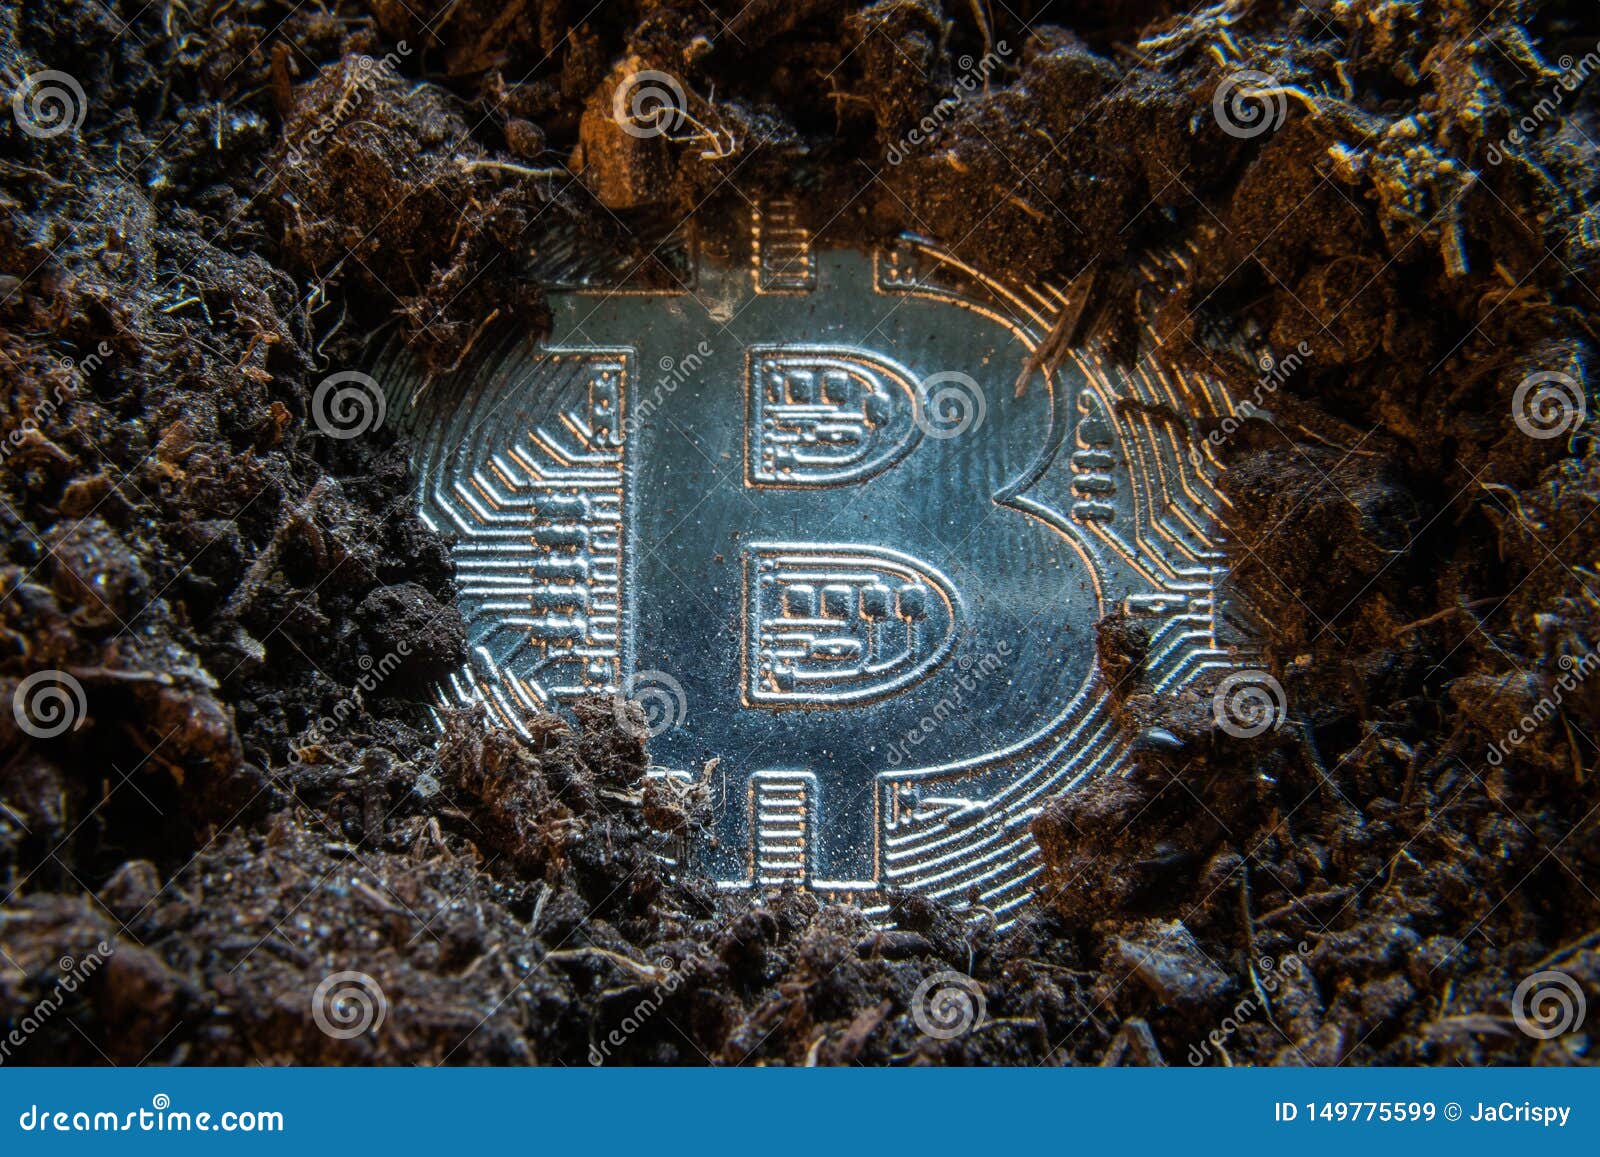 Mining Crypto Currency - Bitcoin. Online Money Coin In The Dirt Ground. Digital Currency, Block ...